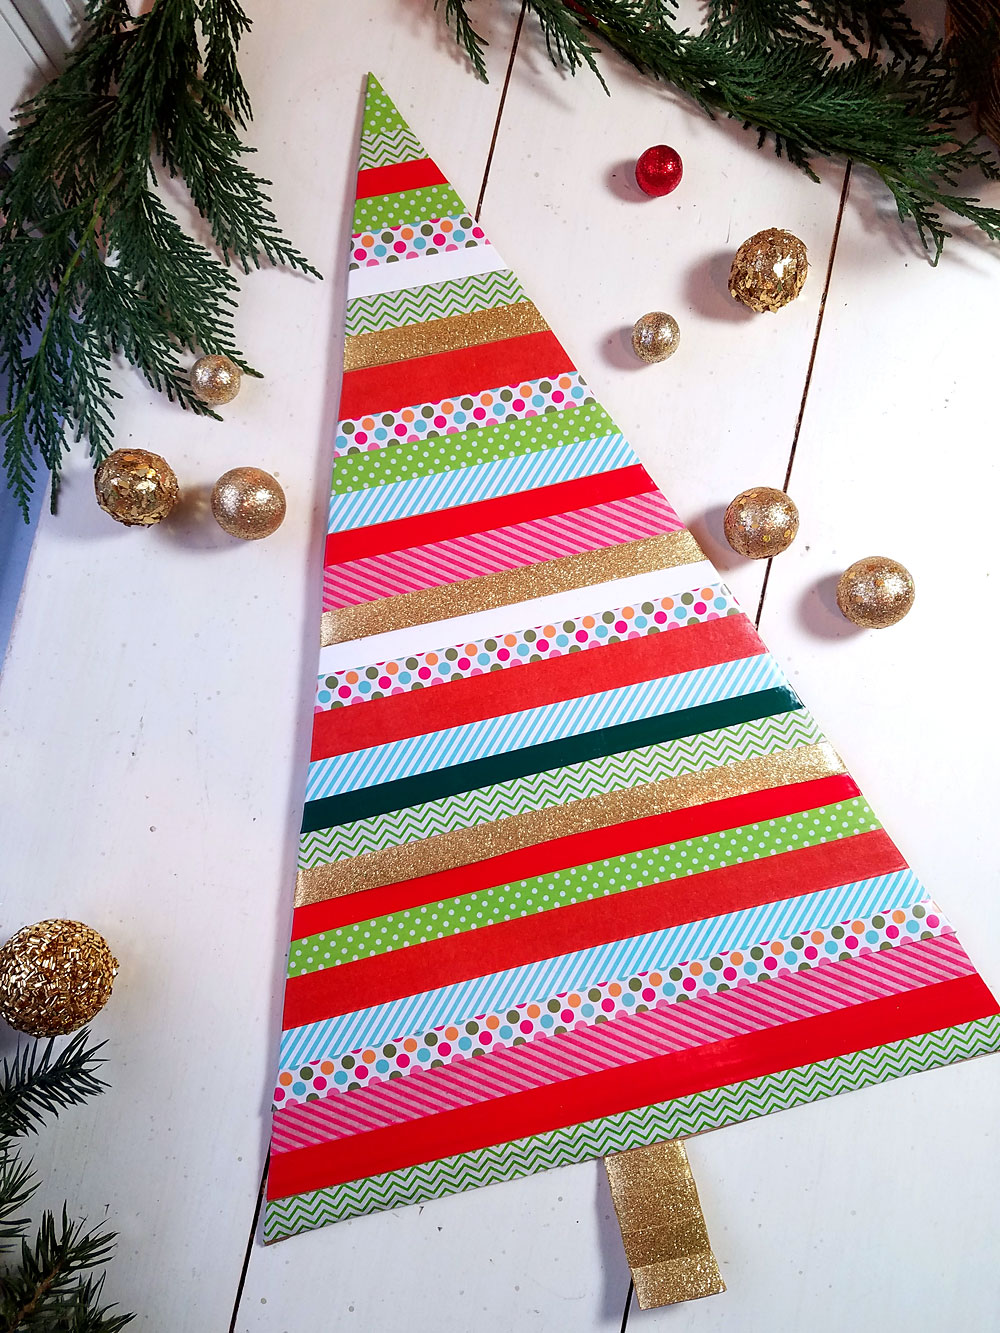 Washi Tape Christmas Decorating Ideas for Your Home - Ziggity Zoom